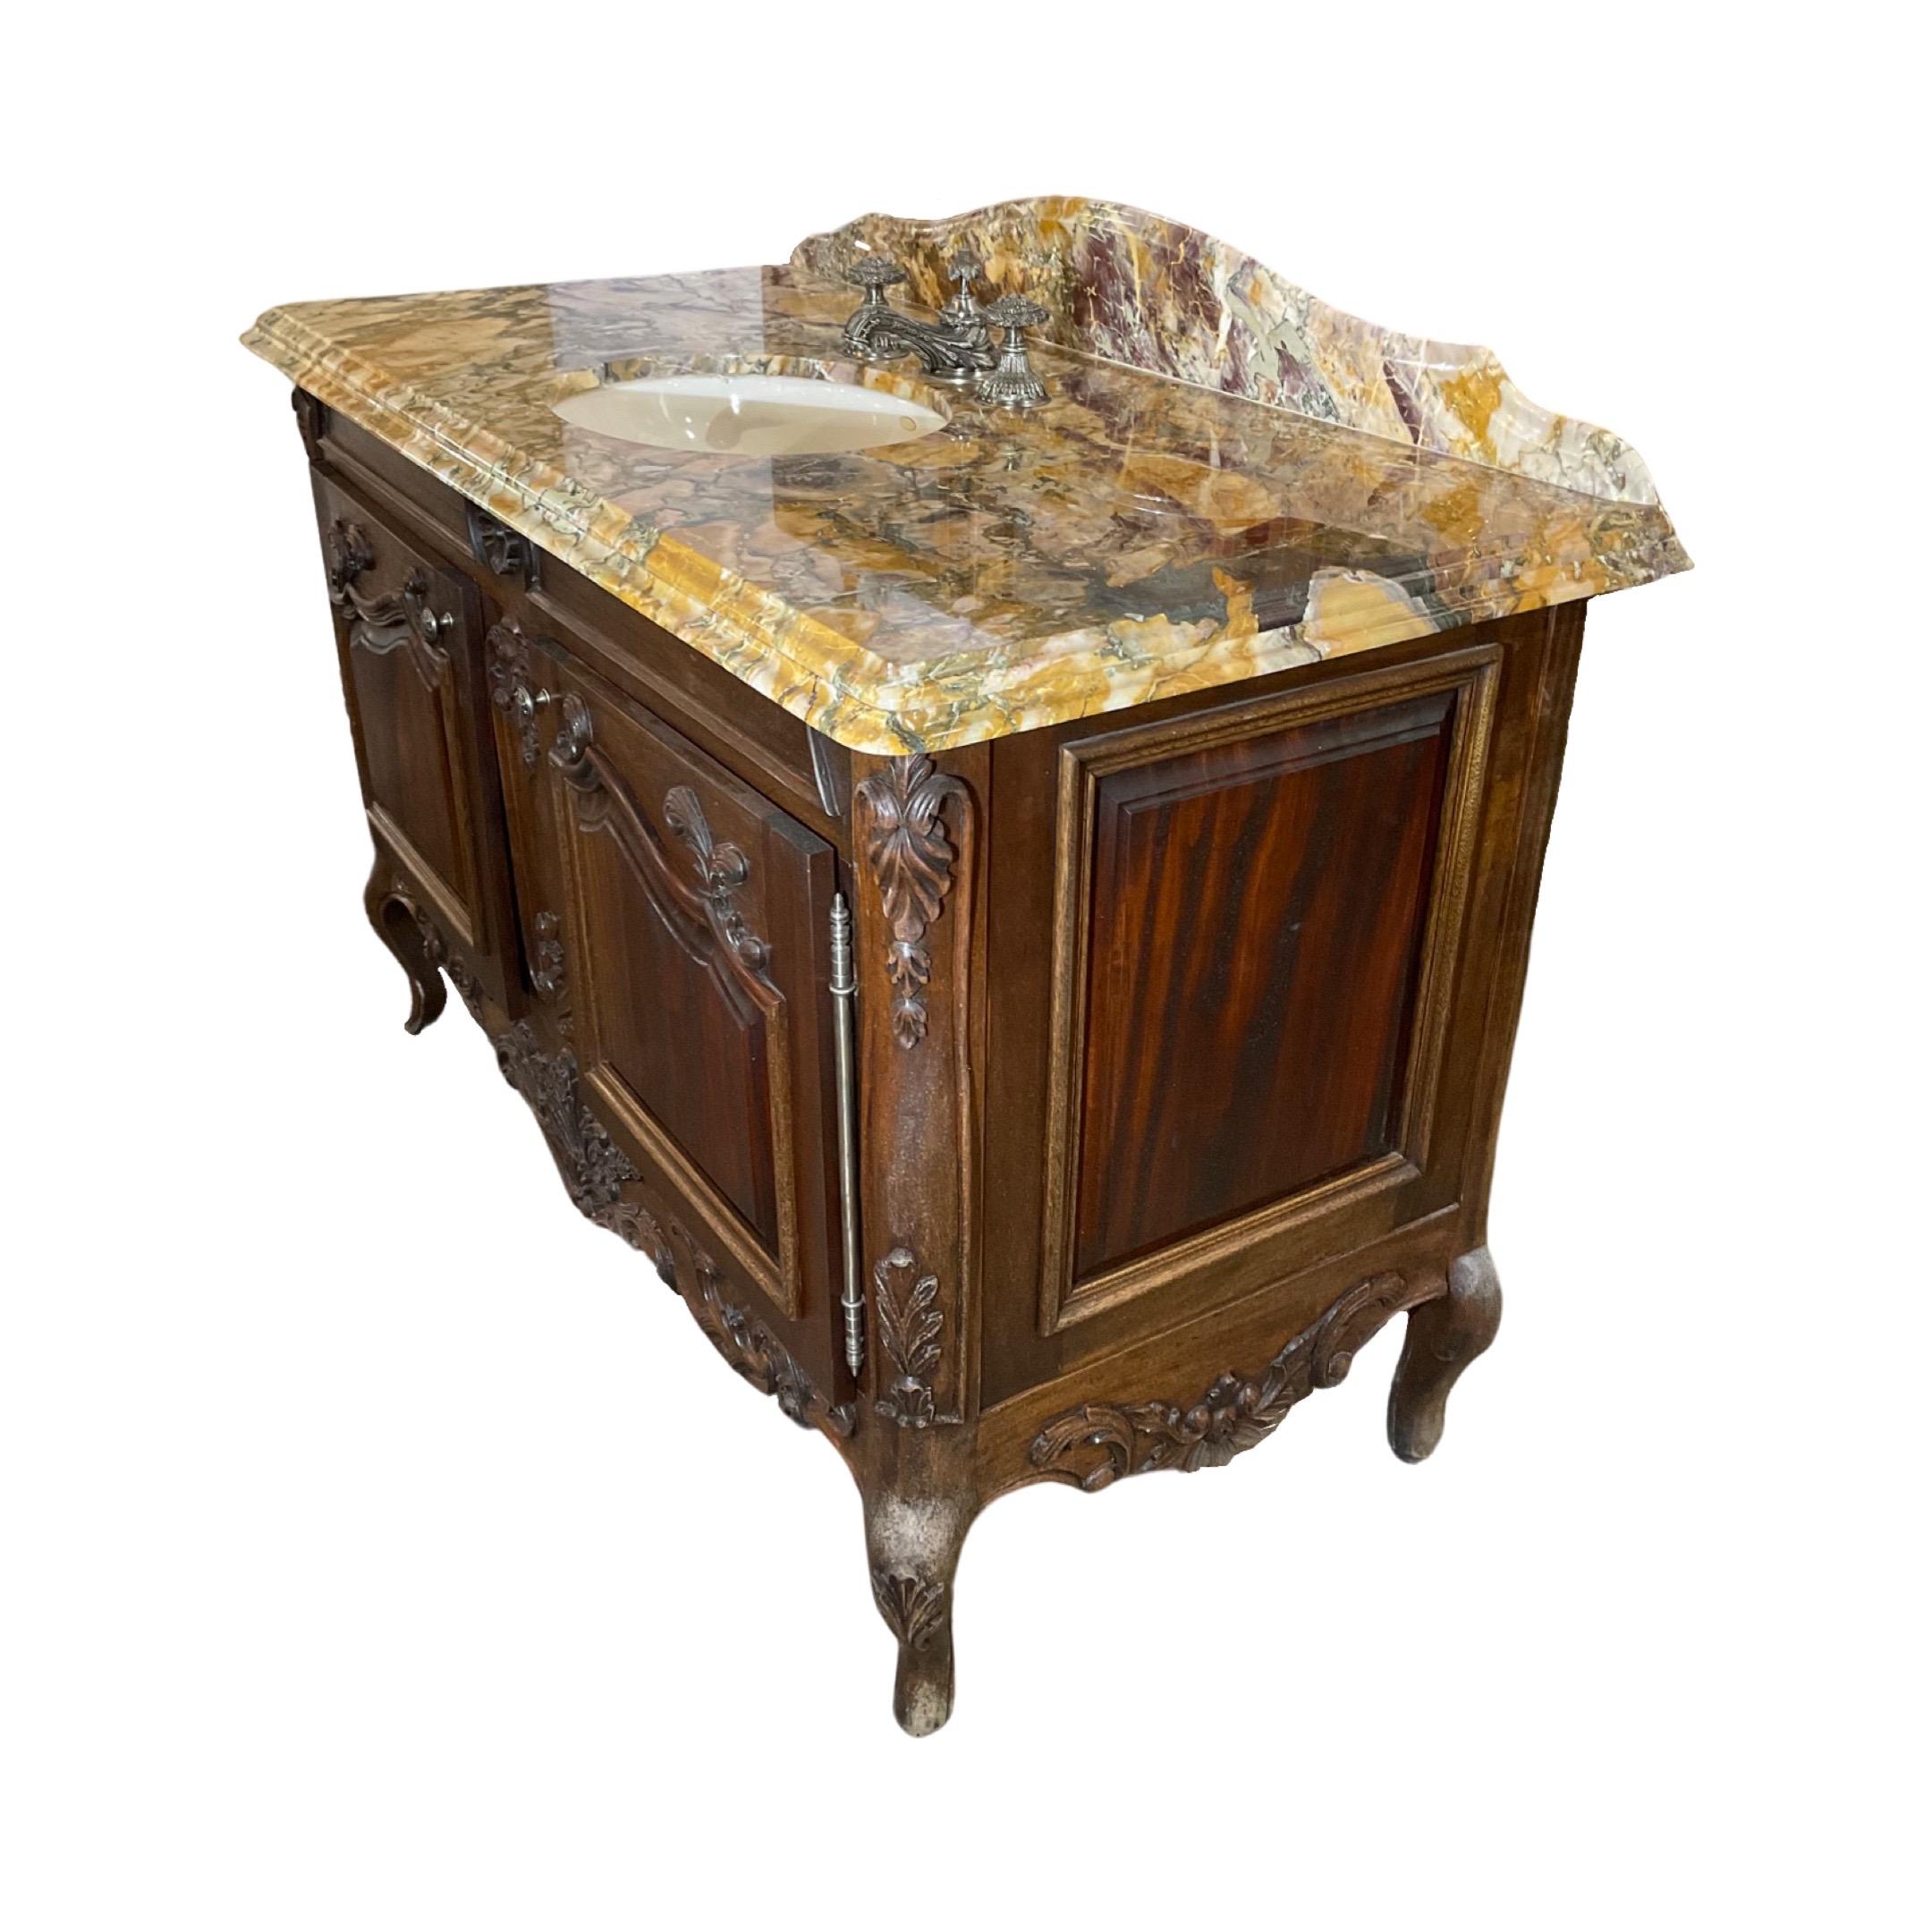 19th Century French Breche de Benou Jaune Marble and Walnut Sink For Sale